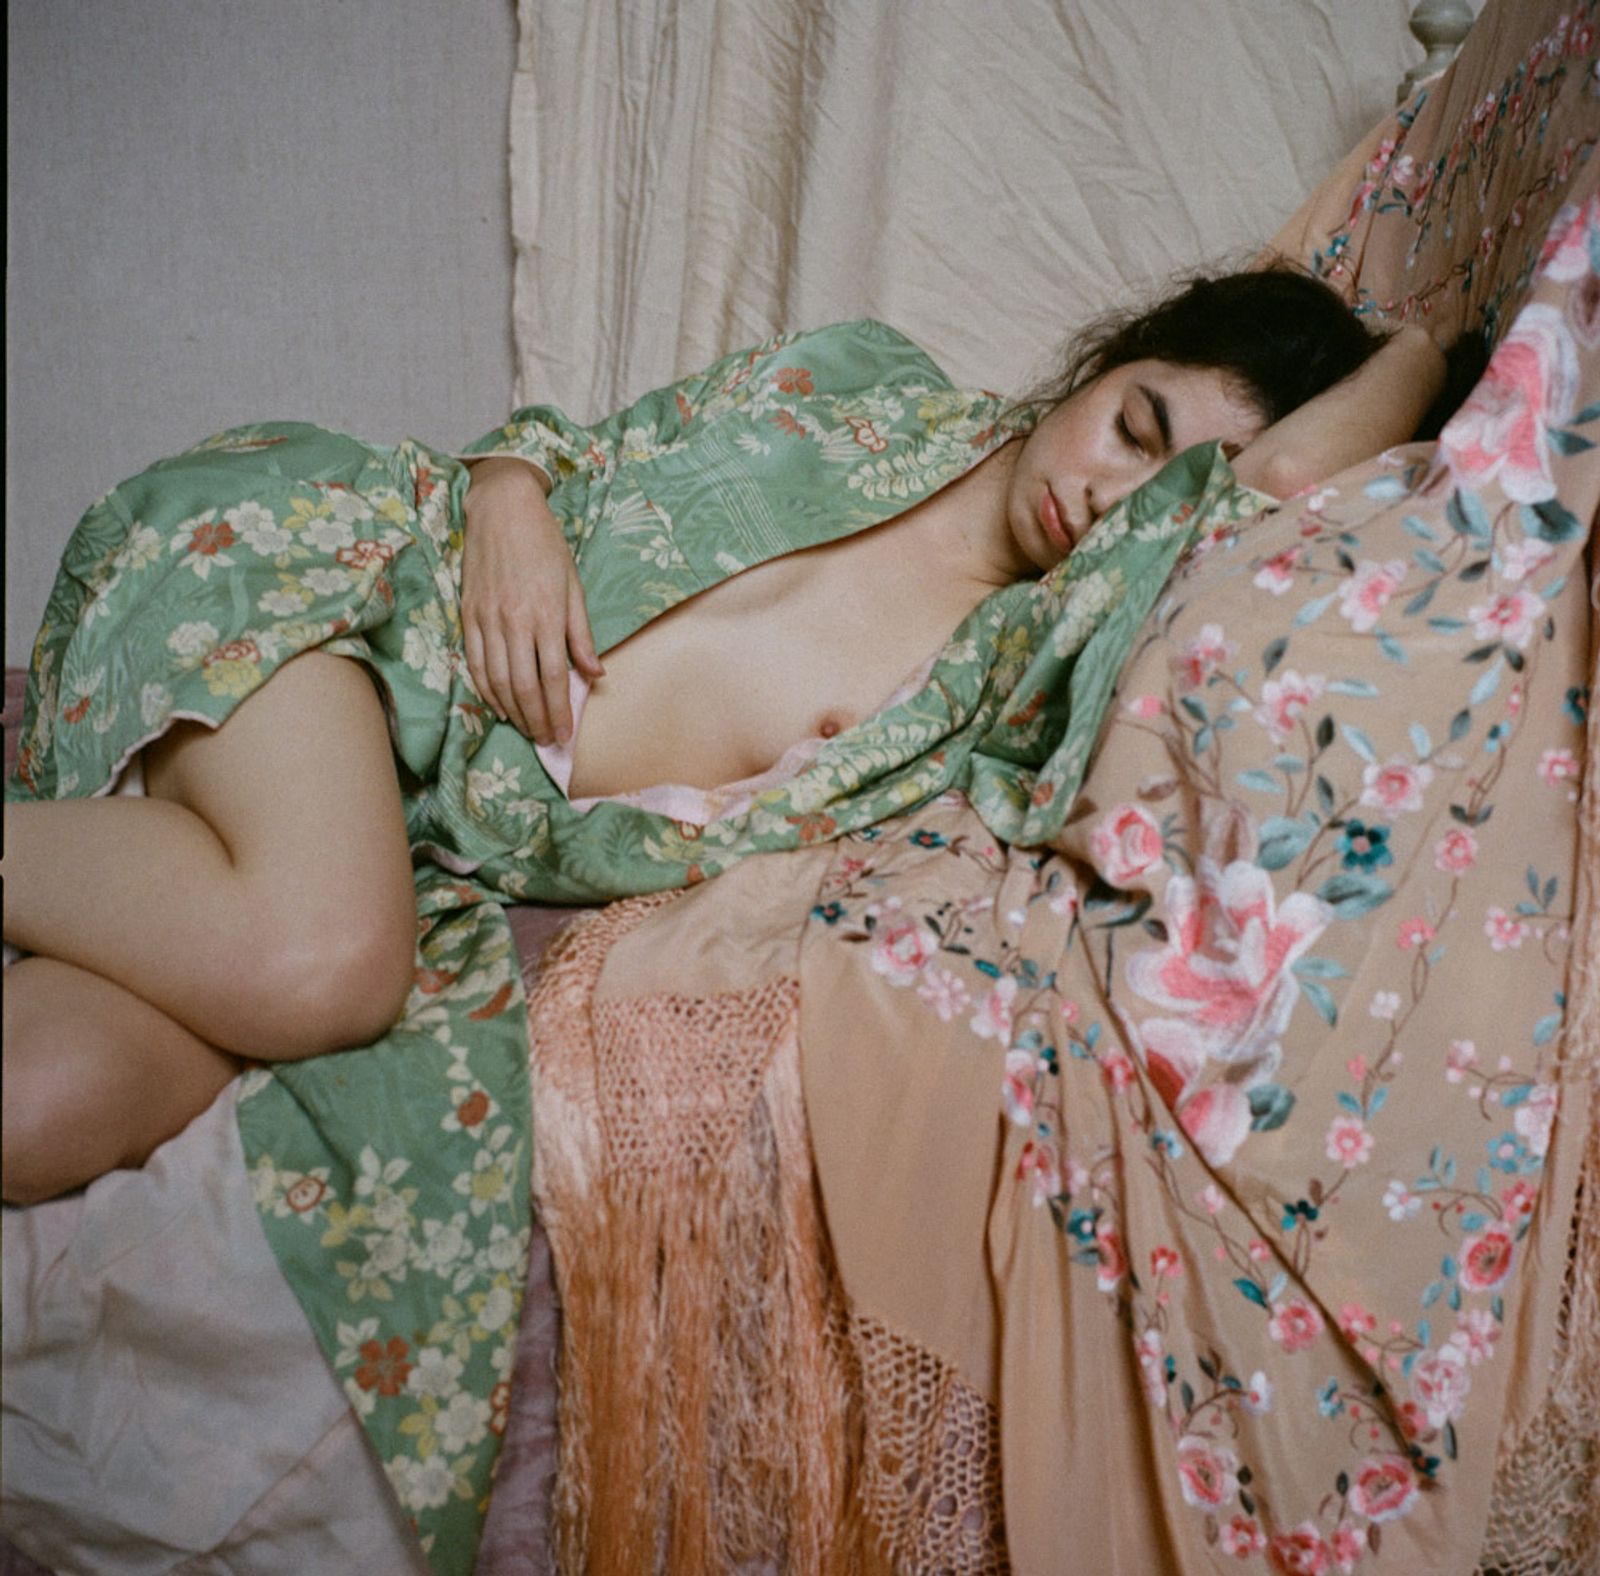 © Myscha Oréo - Image from the Kimono series - A conversation with Breitner photography project